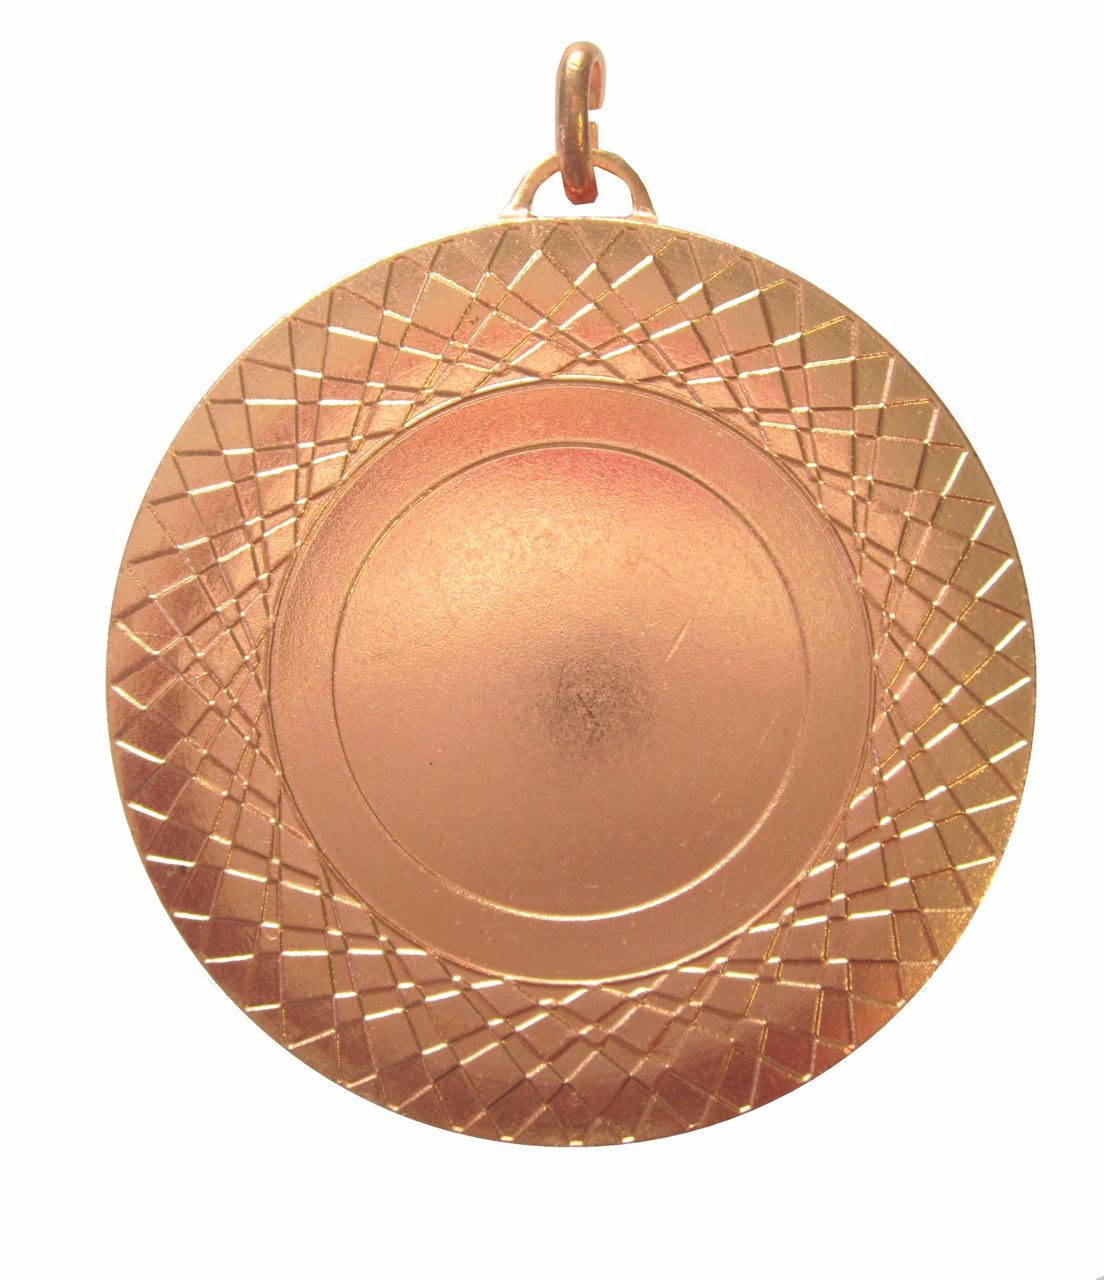 Copper Assertion Bright Finish Medal (size: 50mm) - 5807